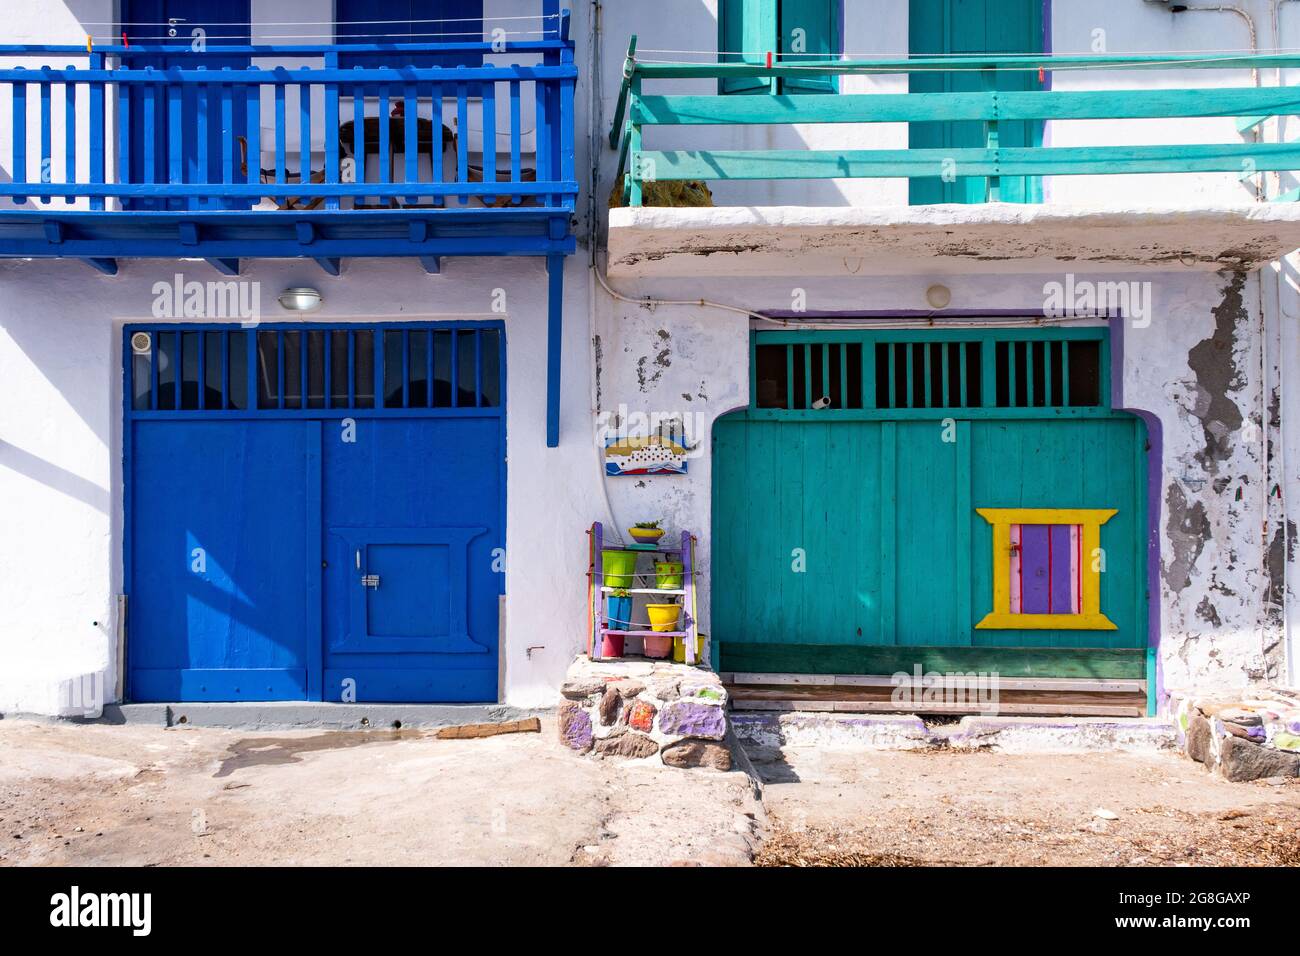 Colorful blue and green garage doors in greek Klima fishermen village - the most colorful village in Greece, with colorful pots, balconies and traditi Stock Photo